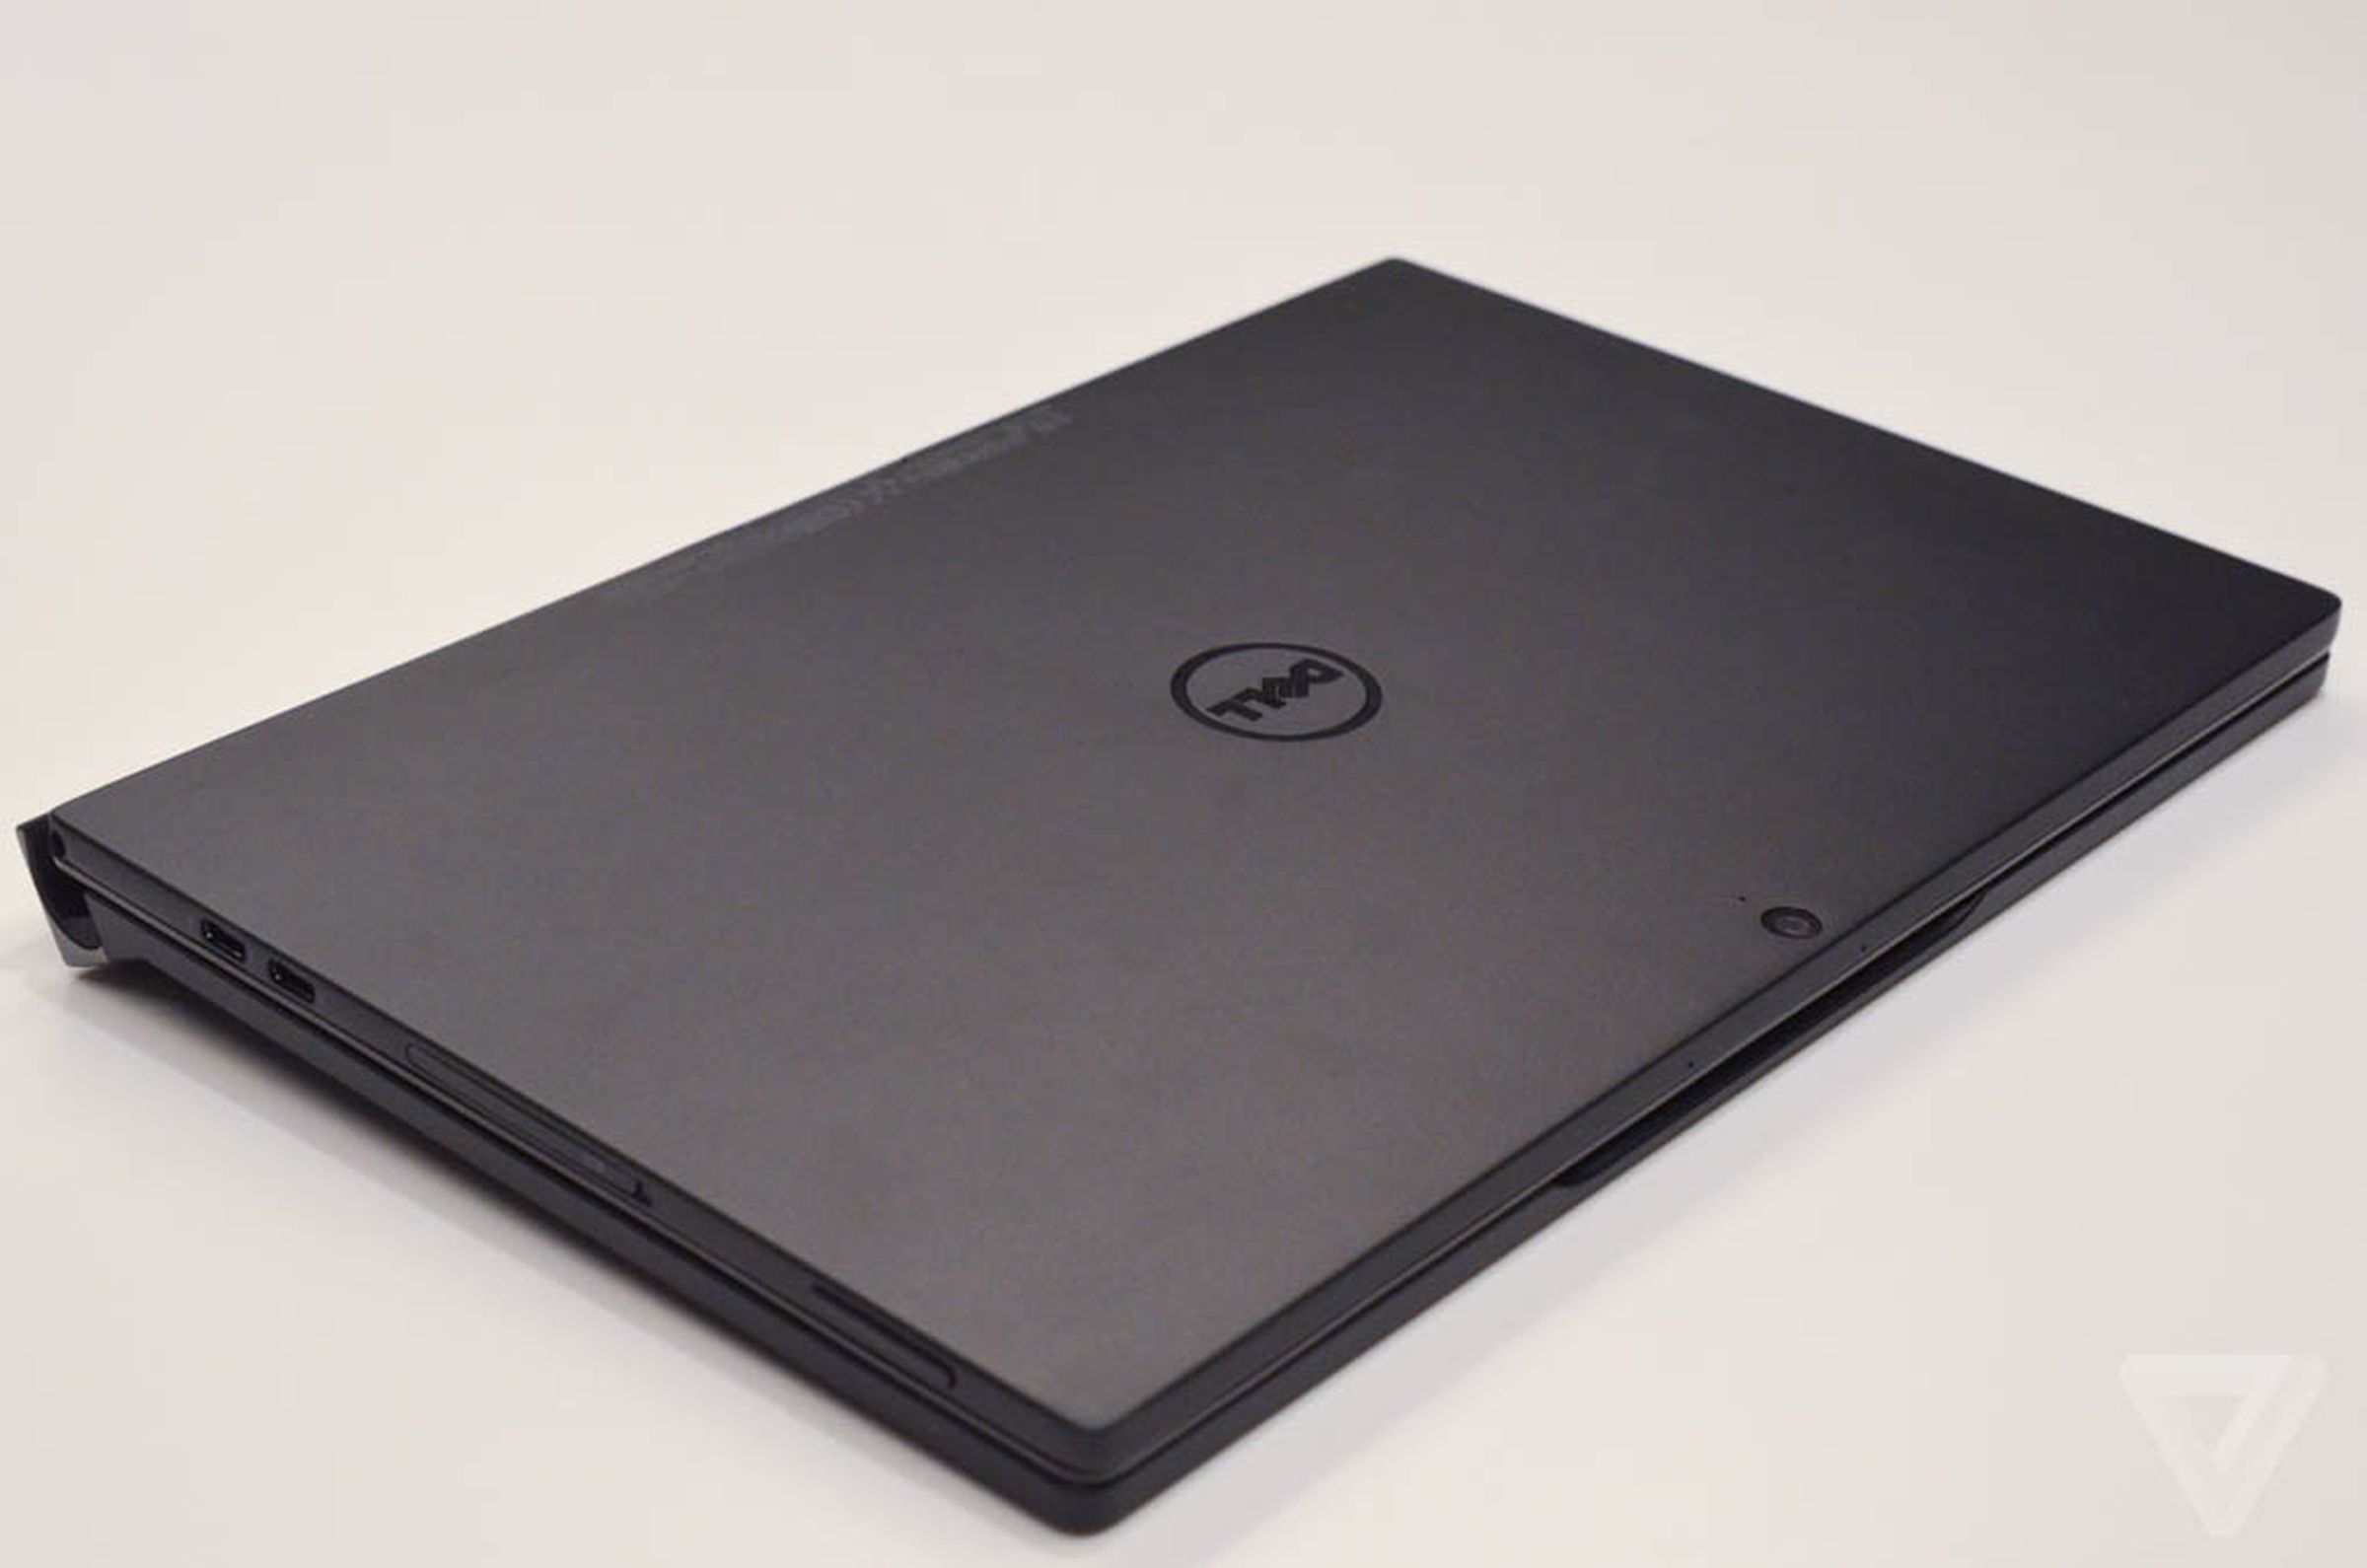 Dell XPS 12 (2015) hands-on photos